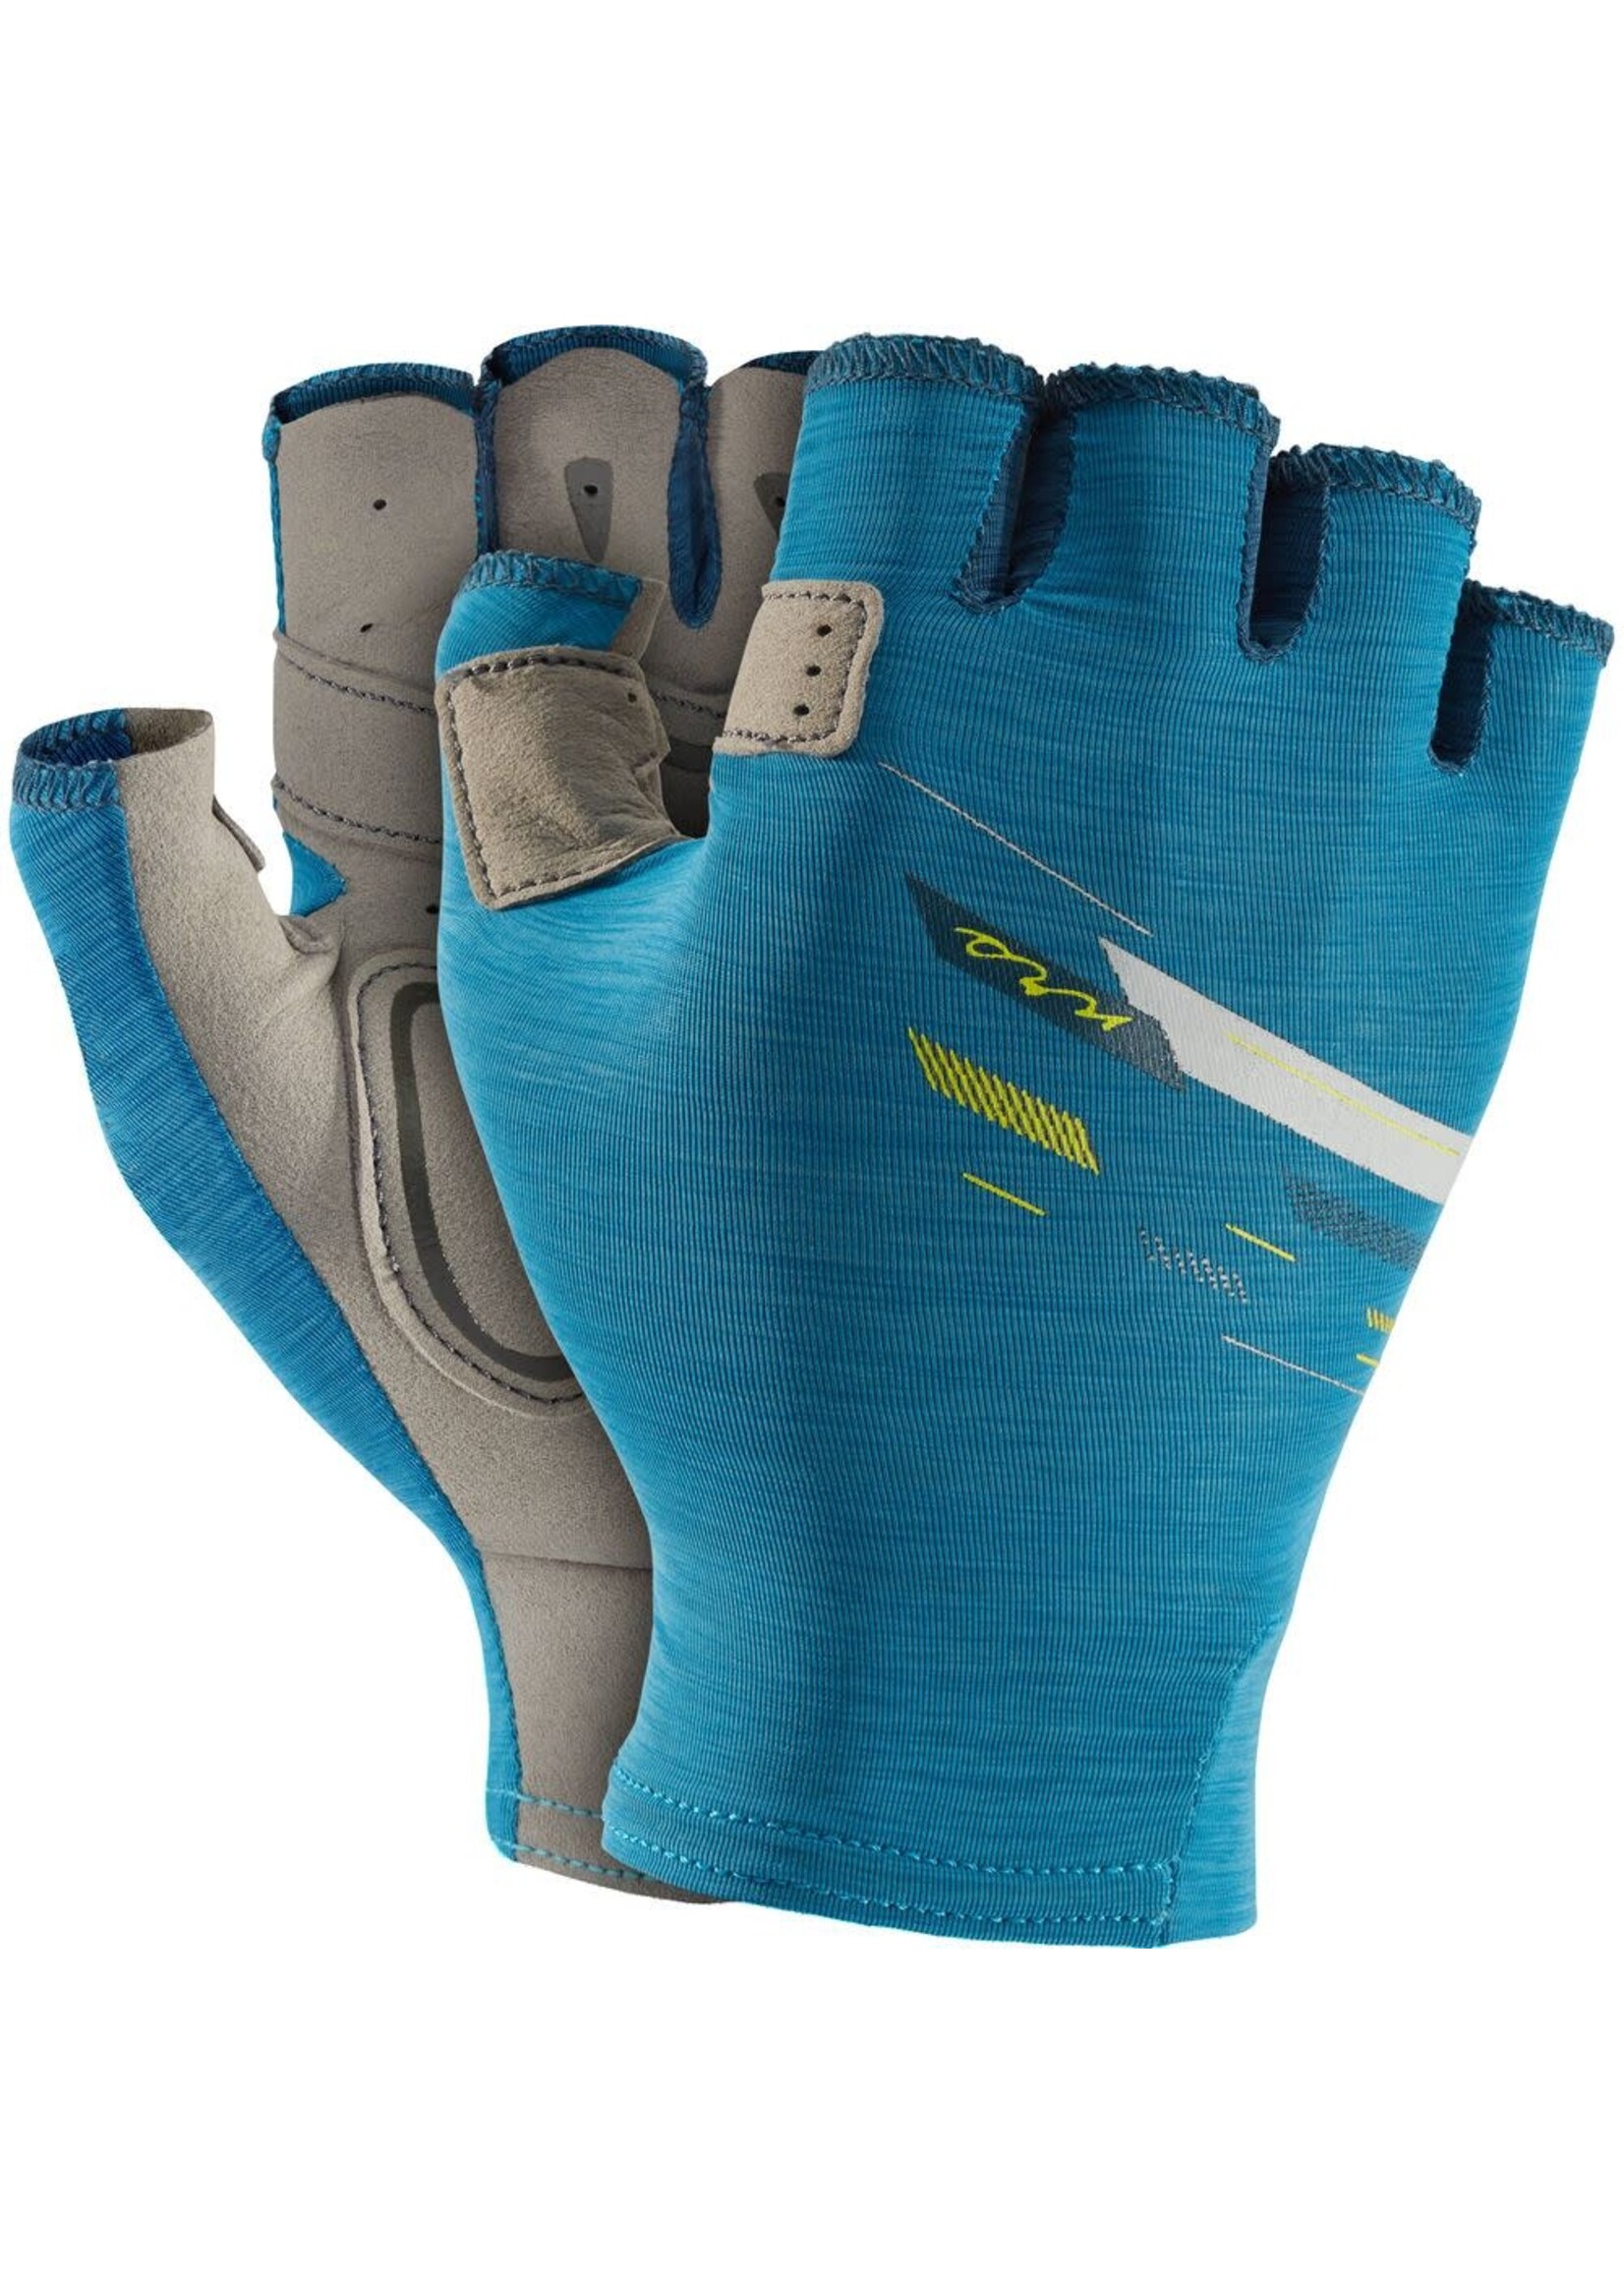 NRS NRS Womens Boater's Glove Fjord - M